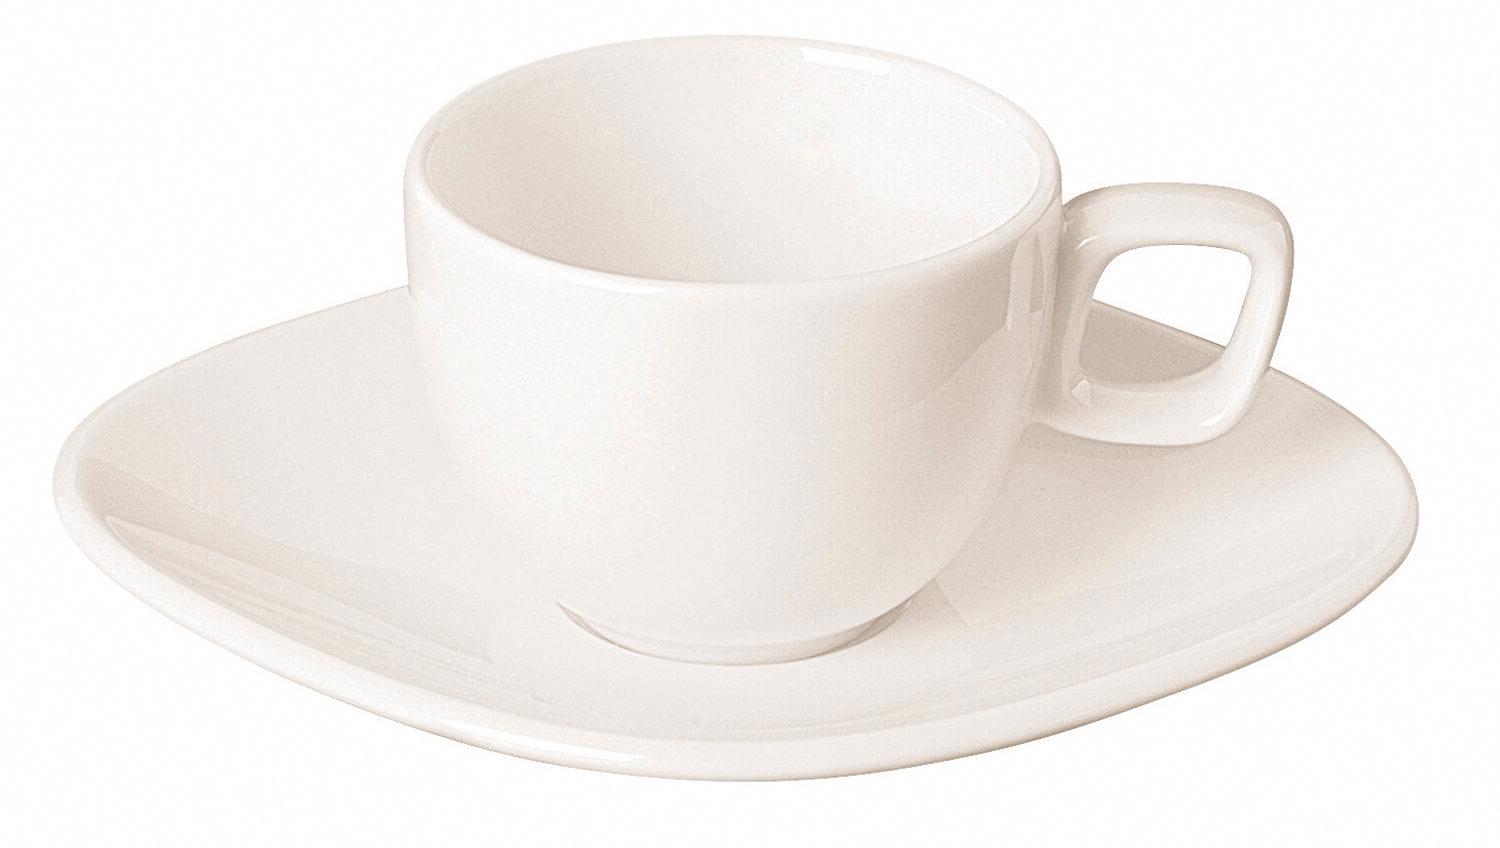 Perspective cappuccino saucer, 180mm